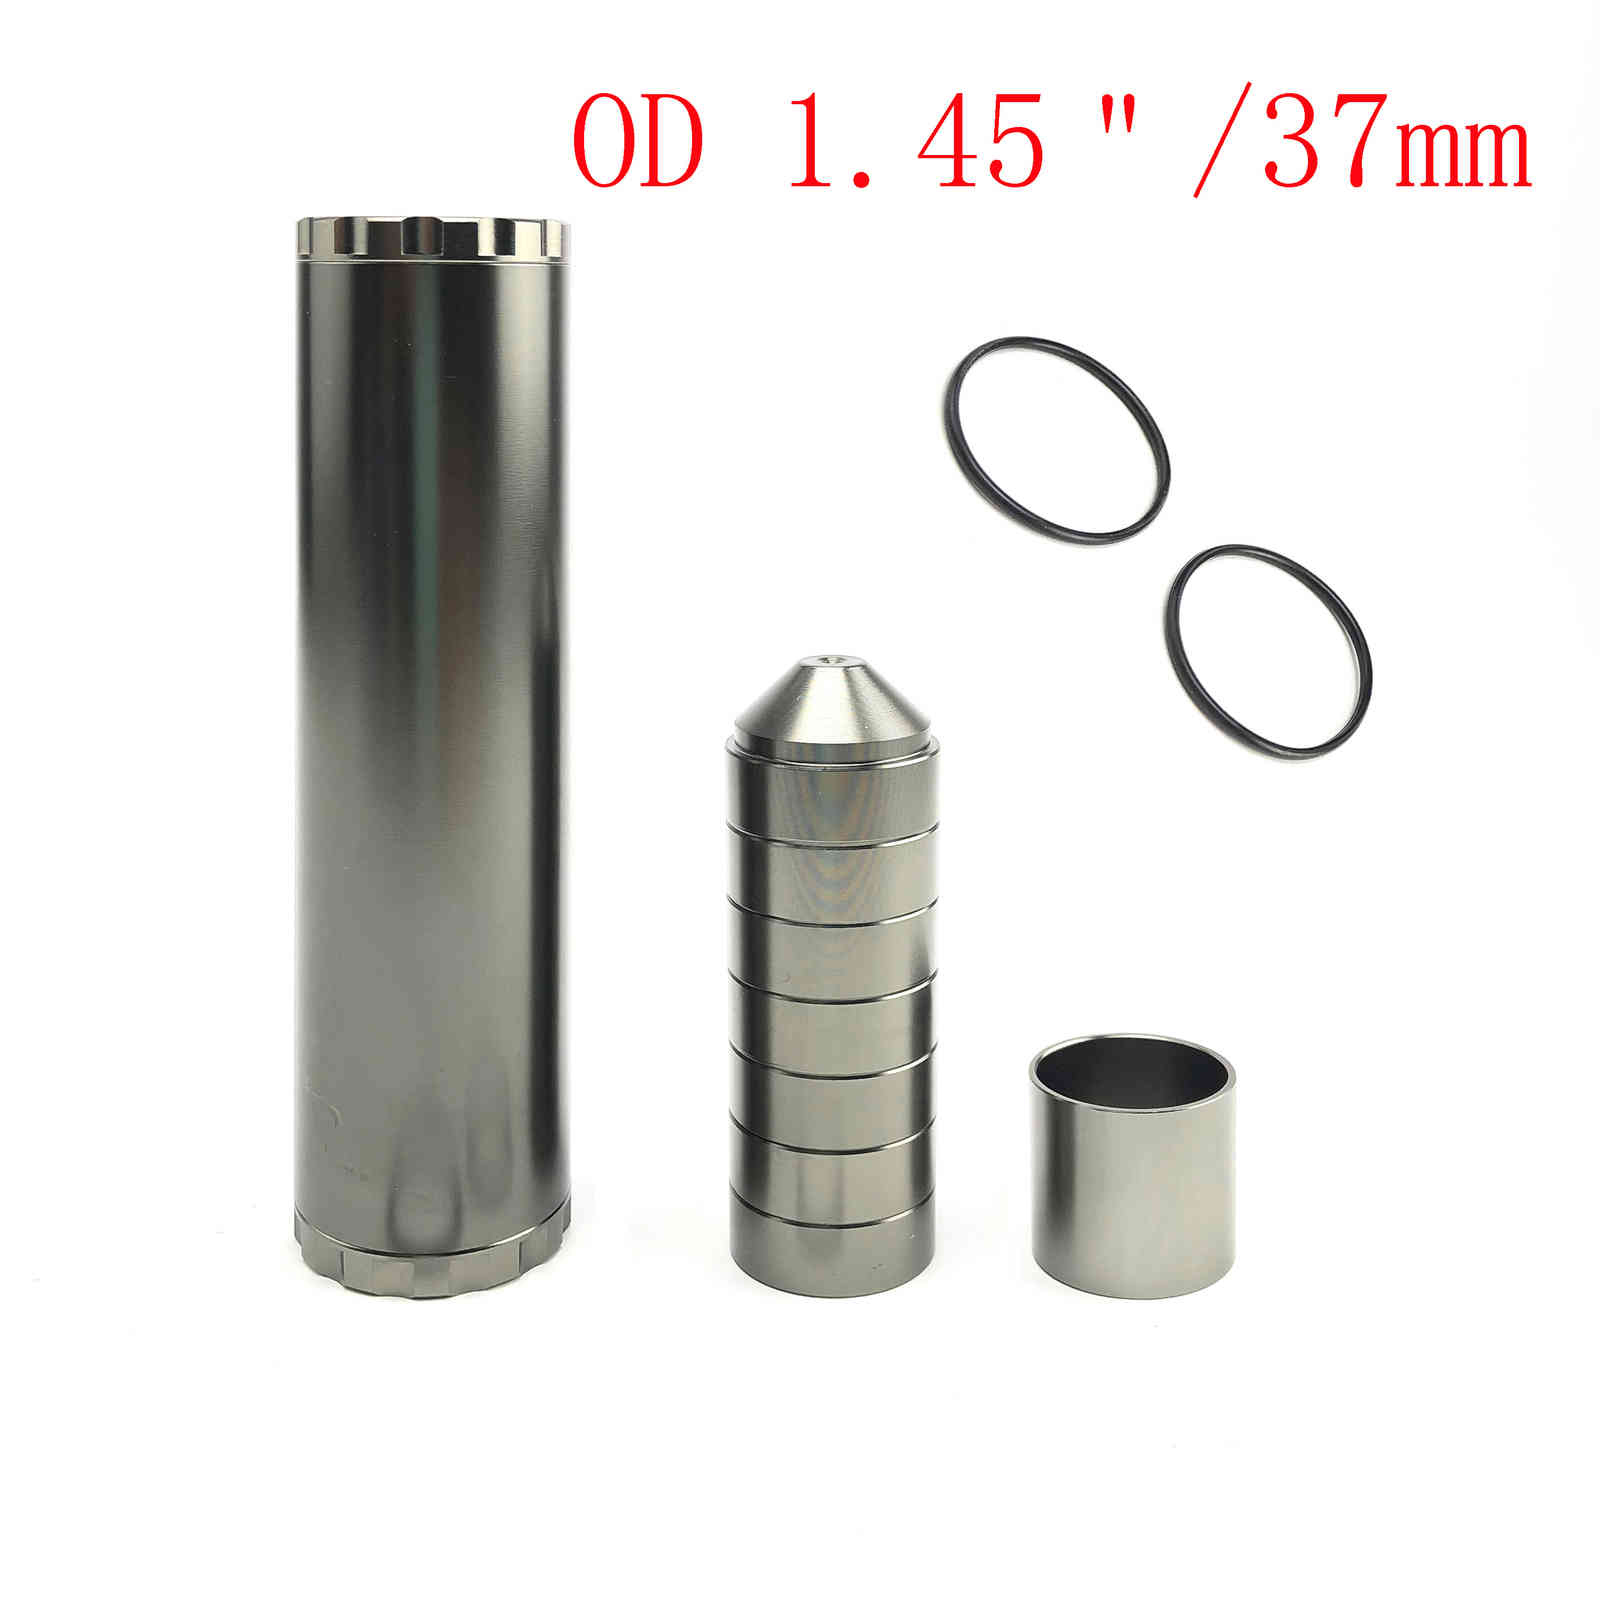 L 6&quot; OD 1.45&quot; Solvent Trap 1/2x28 2 in 1 Threads Black Metal Gray 7 Cups + Spacer with 2 Rubber O Rings 5/8-24 Car Fuel Filter от DHgate WW